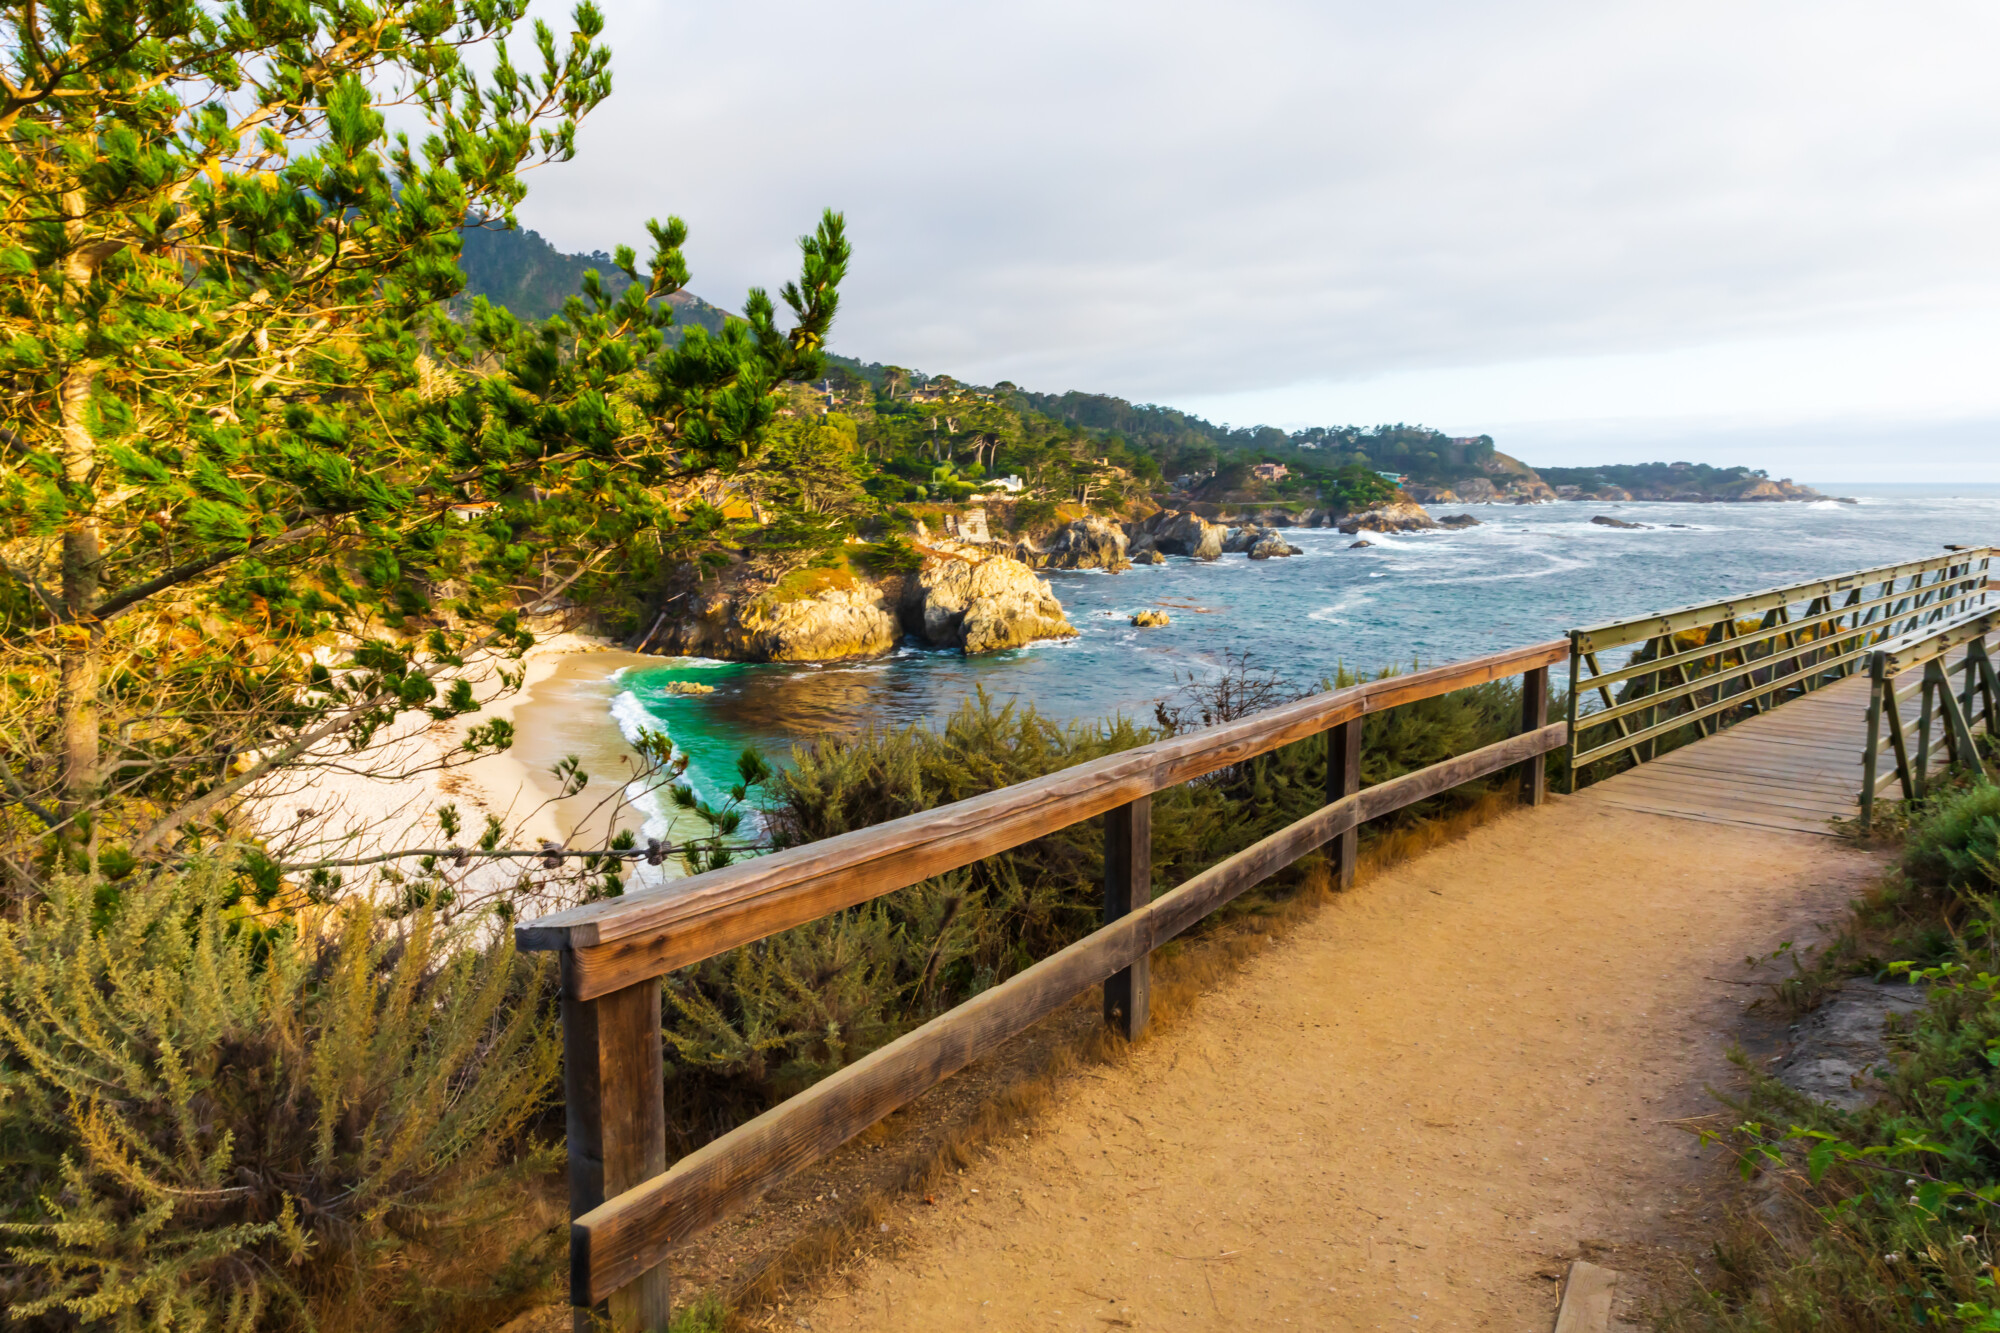 Gibson’s beach in Point Lobos State Nature Reserve in Carmel-B